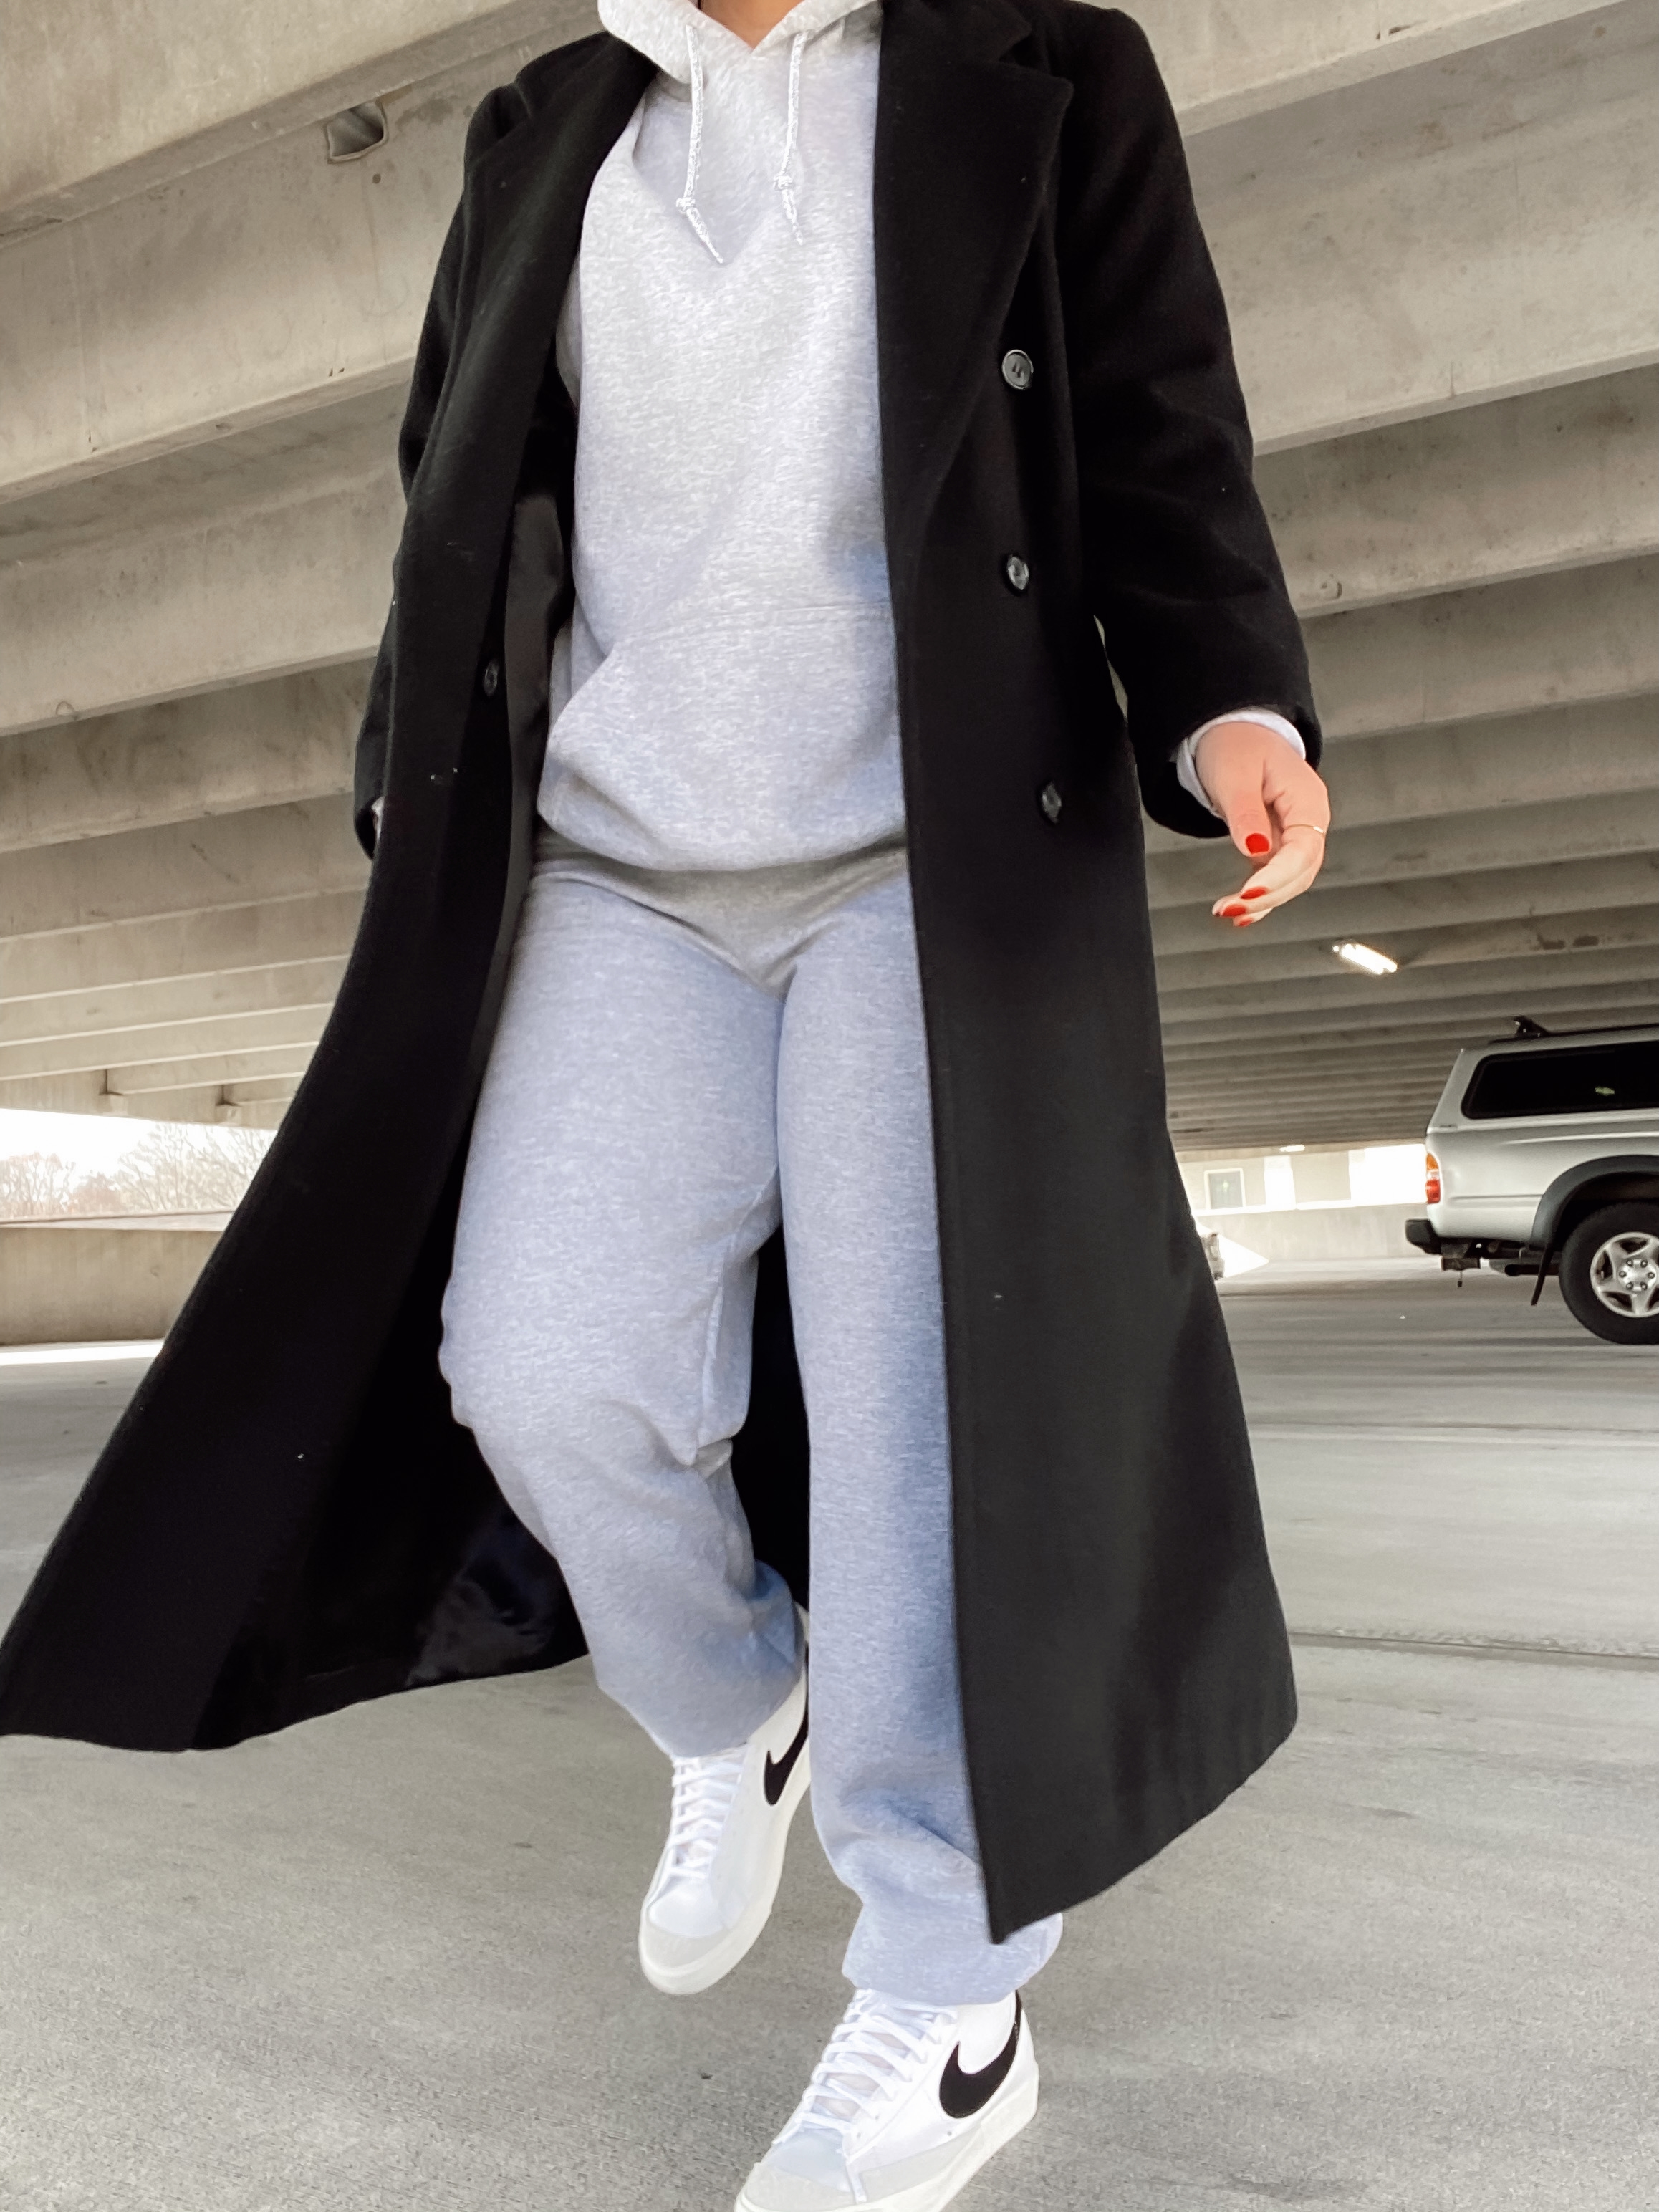 8 SWEATSUIT OUTFIT IDEAS FOR WINTER